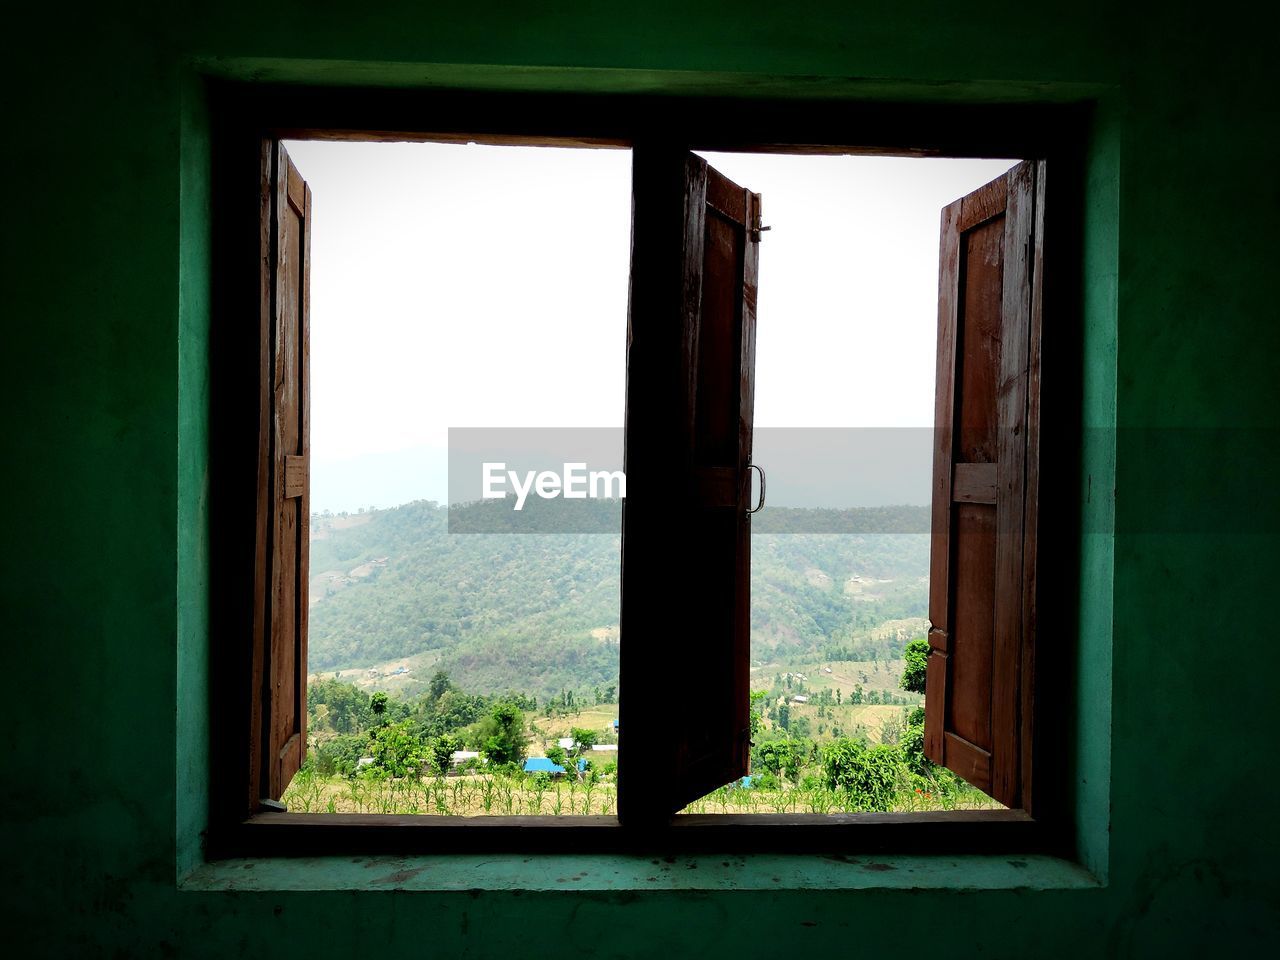 SCENIC VIEW OF MOUNTAINS SEEN THROUGH WINDOW